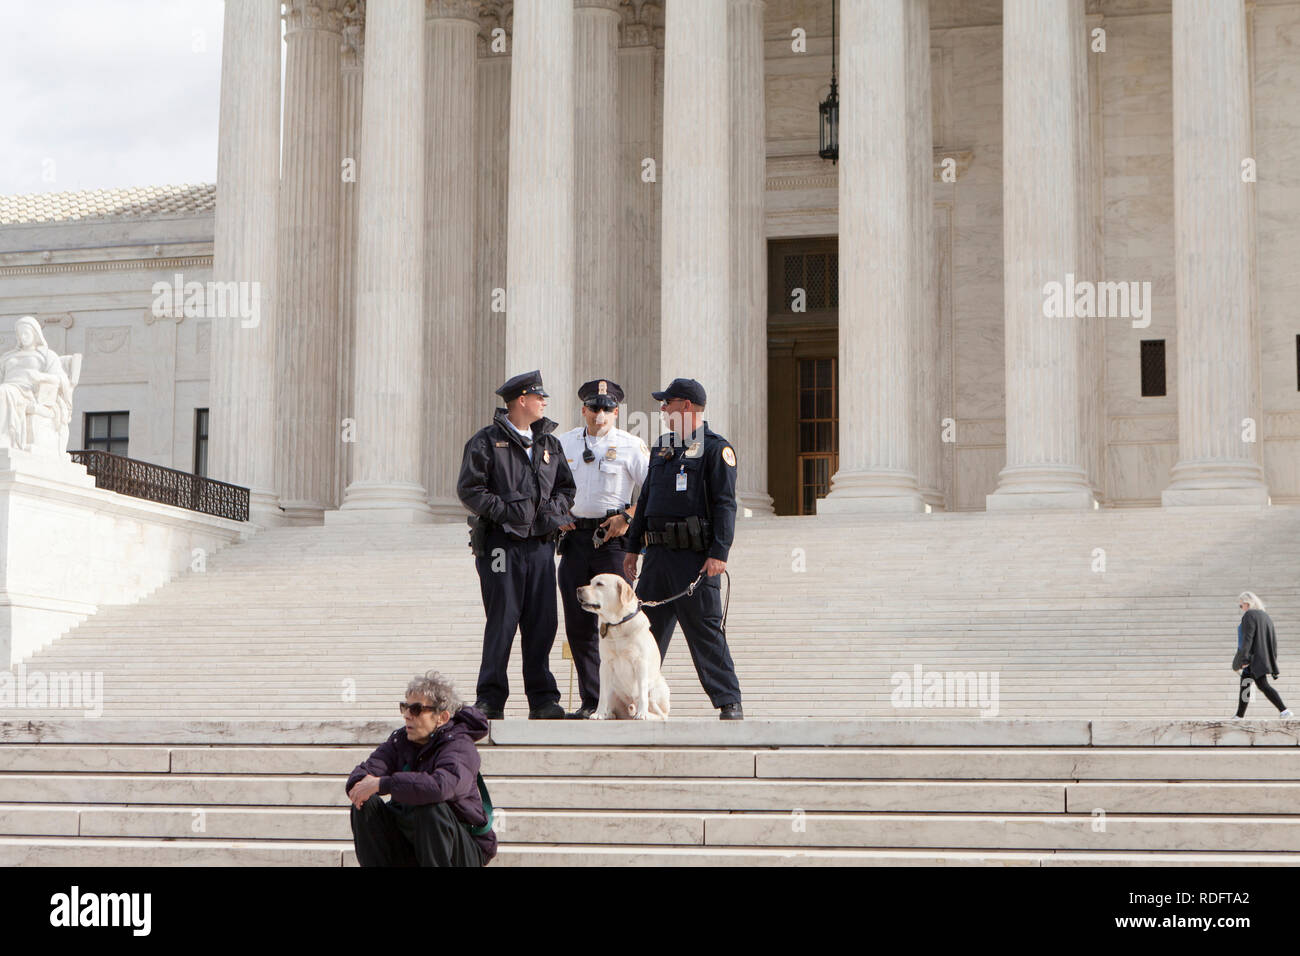 The Supreme Court Police, and police dog, standing at the front steps of the Court building - Washington, DC USA Stock Photo